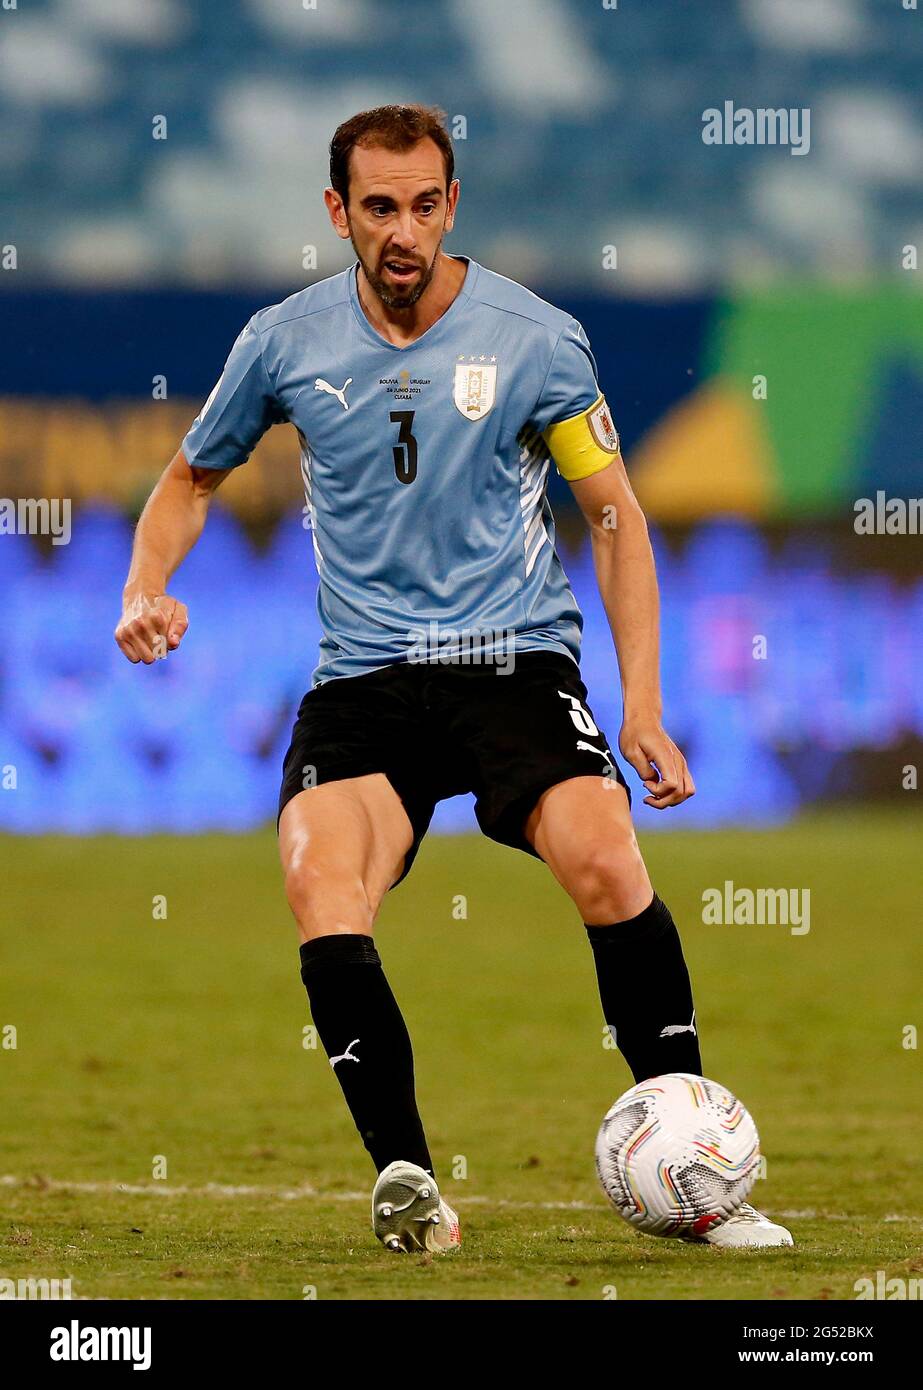 CUIABA, BRAZIL - JUNE 24: Diego Godin of Uruguay in action ,during the match between Bolivia and Uruguay as part of Conmebol Copa America Brazil 2021 at Arena Pantanal on June 24, 2021 in Cuiaba, Brazil. (MB Media) Stock Photo